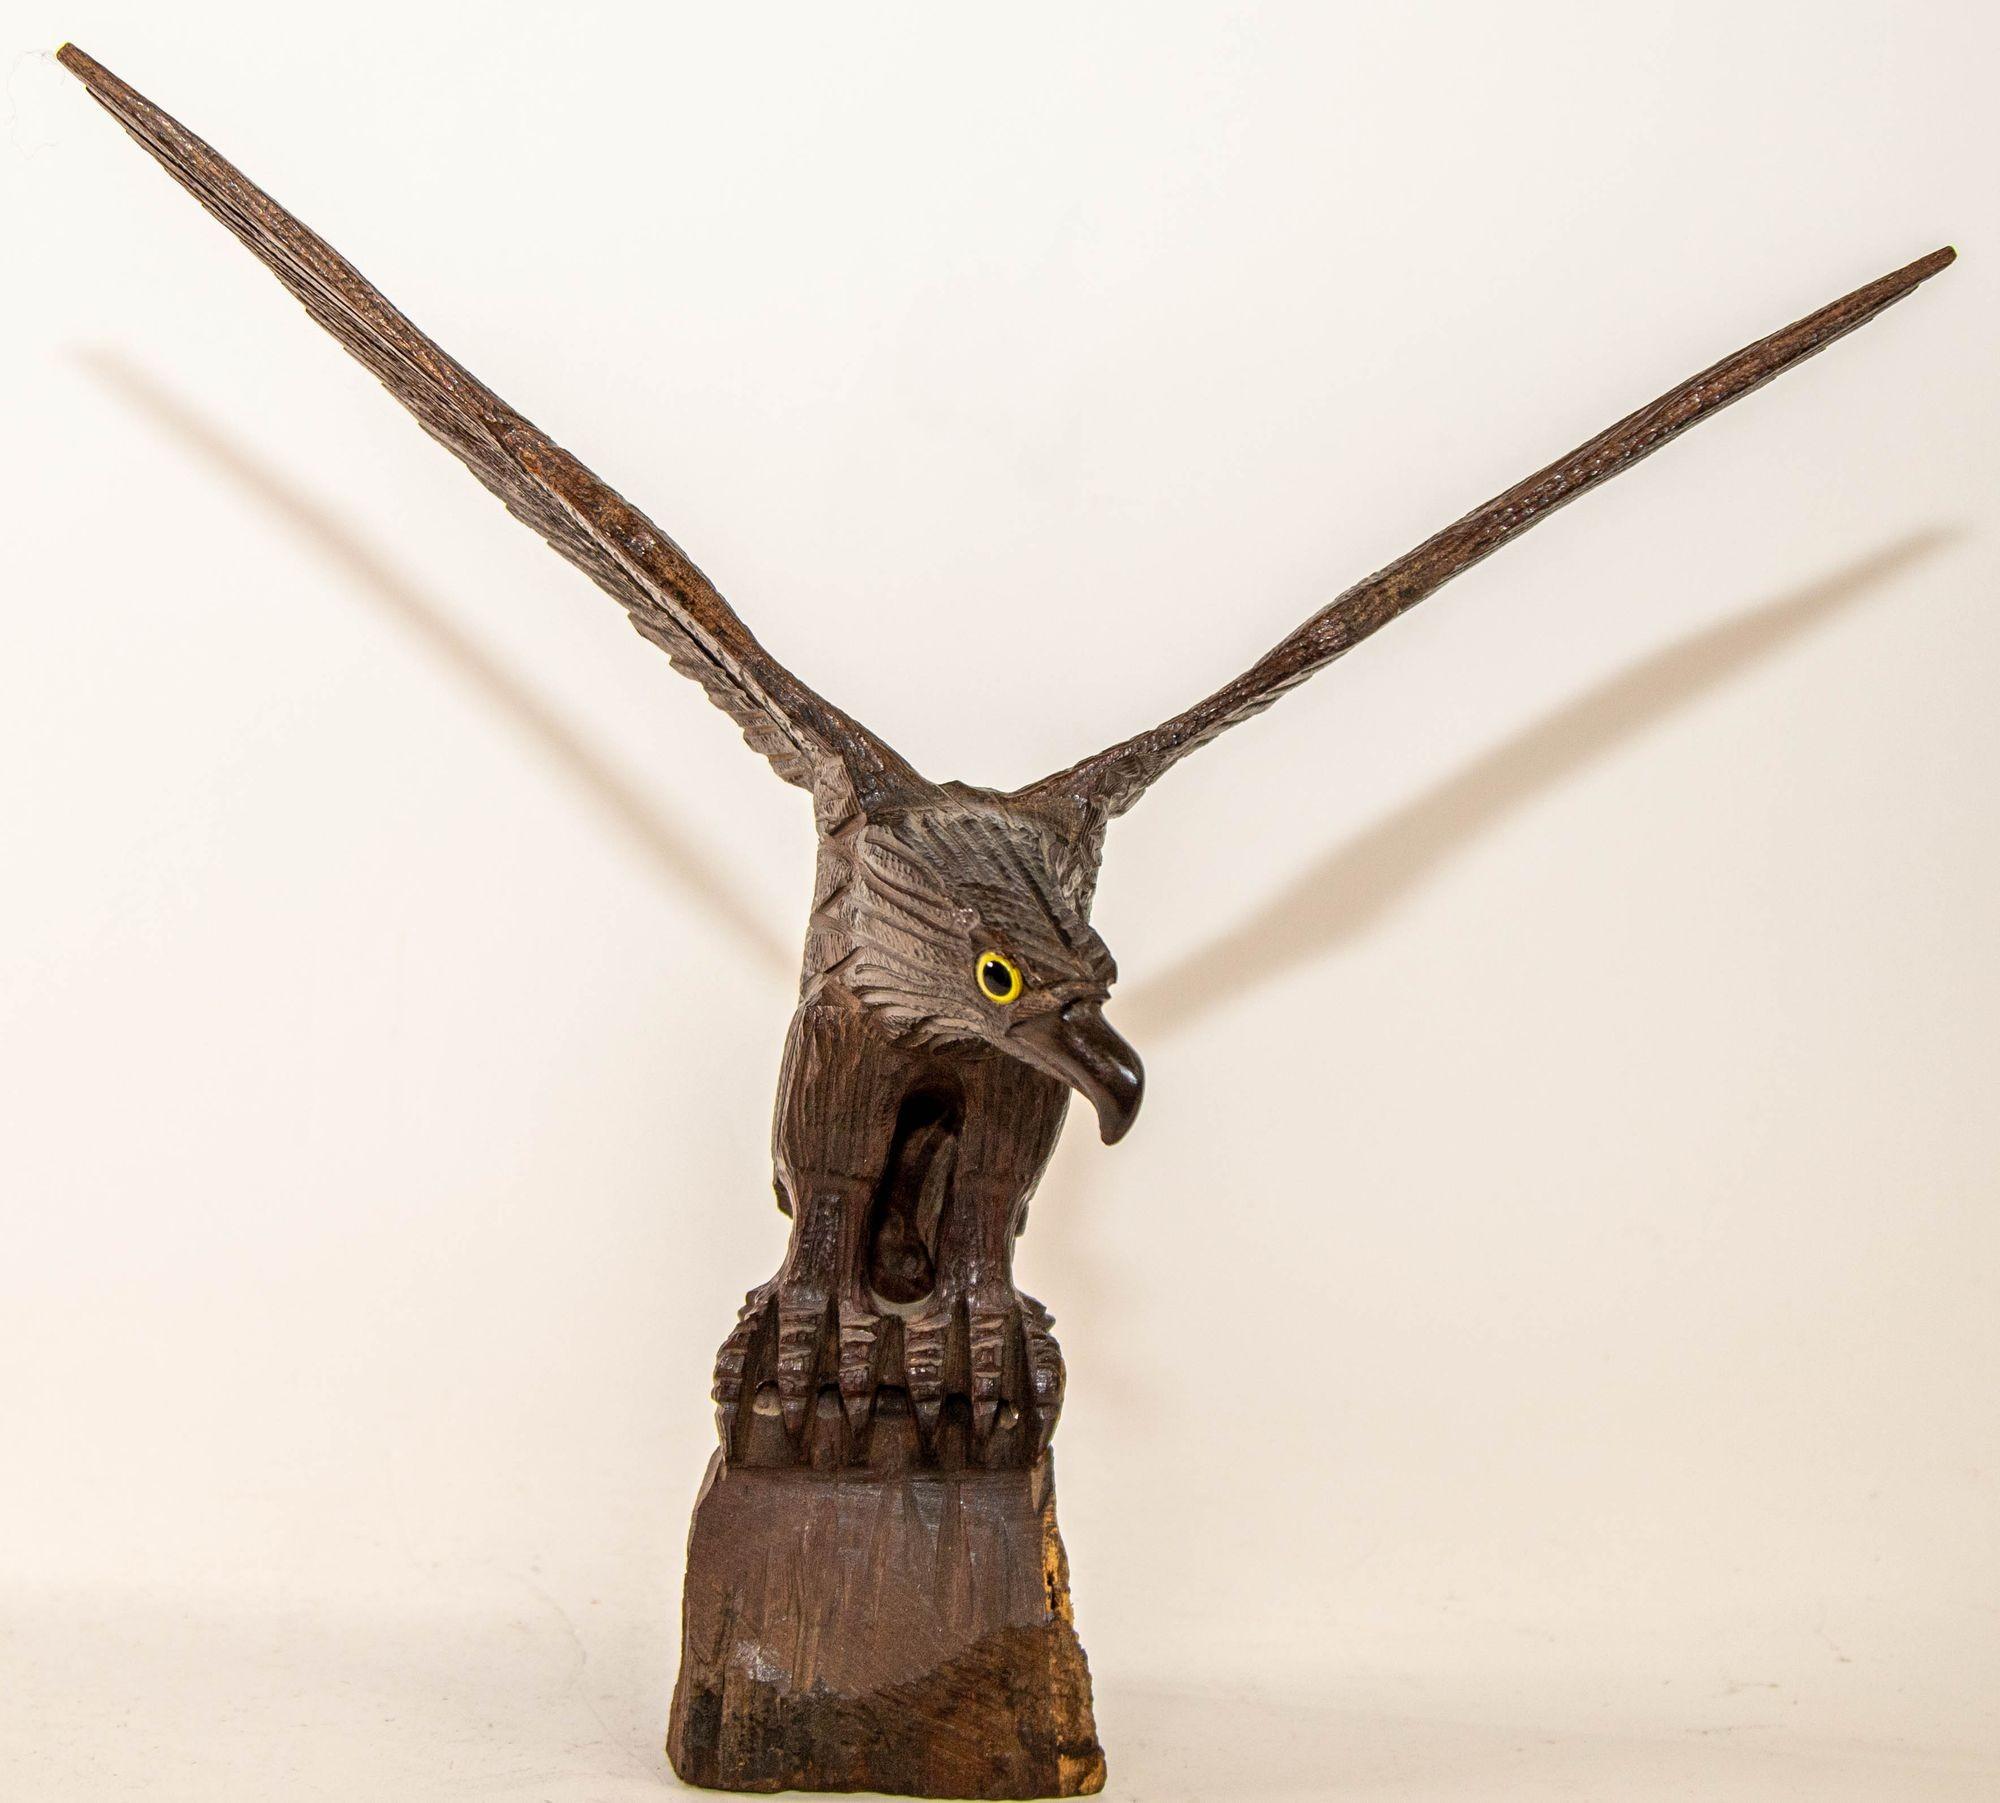 A large hand-carved iron wood eagle perched on a tree stump and surveying the surroundings ready to fly.
Hand carved wood vintage extremely detailed bald eagle perched upon rockery with glass eyes.
Hand carved Ironwood Southwestern seri sculpture